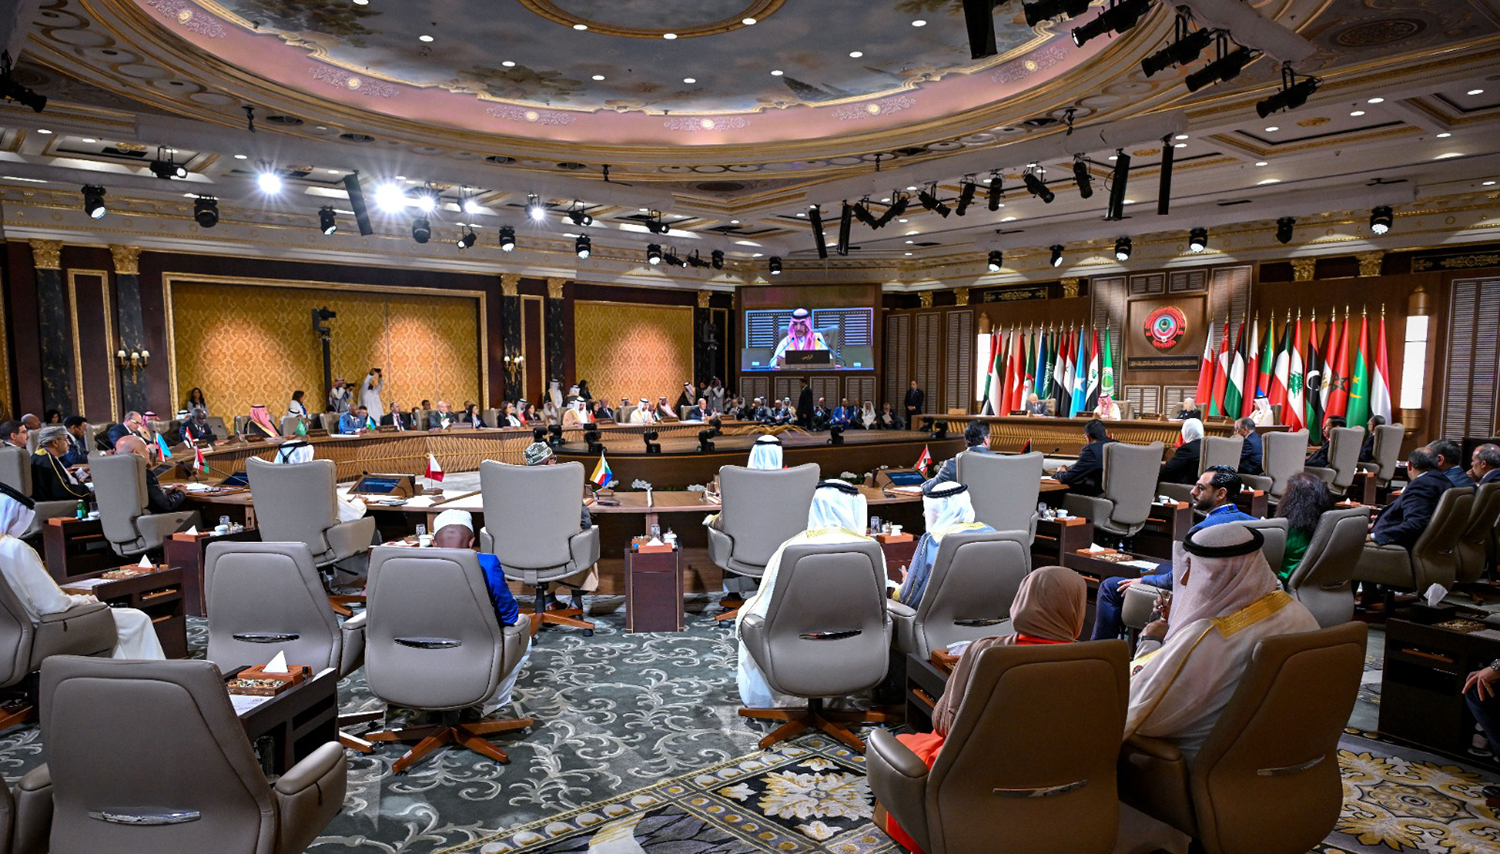 The preparatory socioeconomic council ministerial meeting for the 33rd Arab Summit in Manama